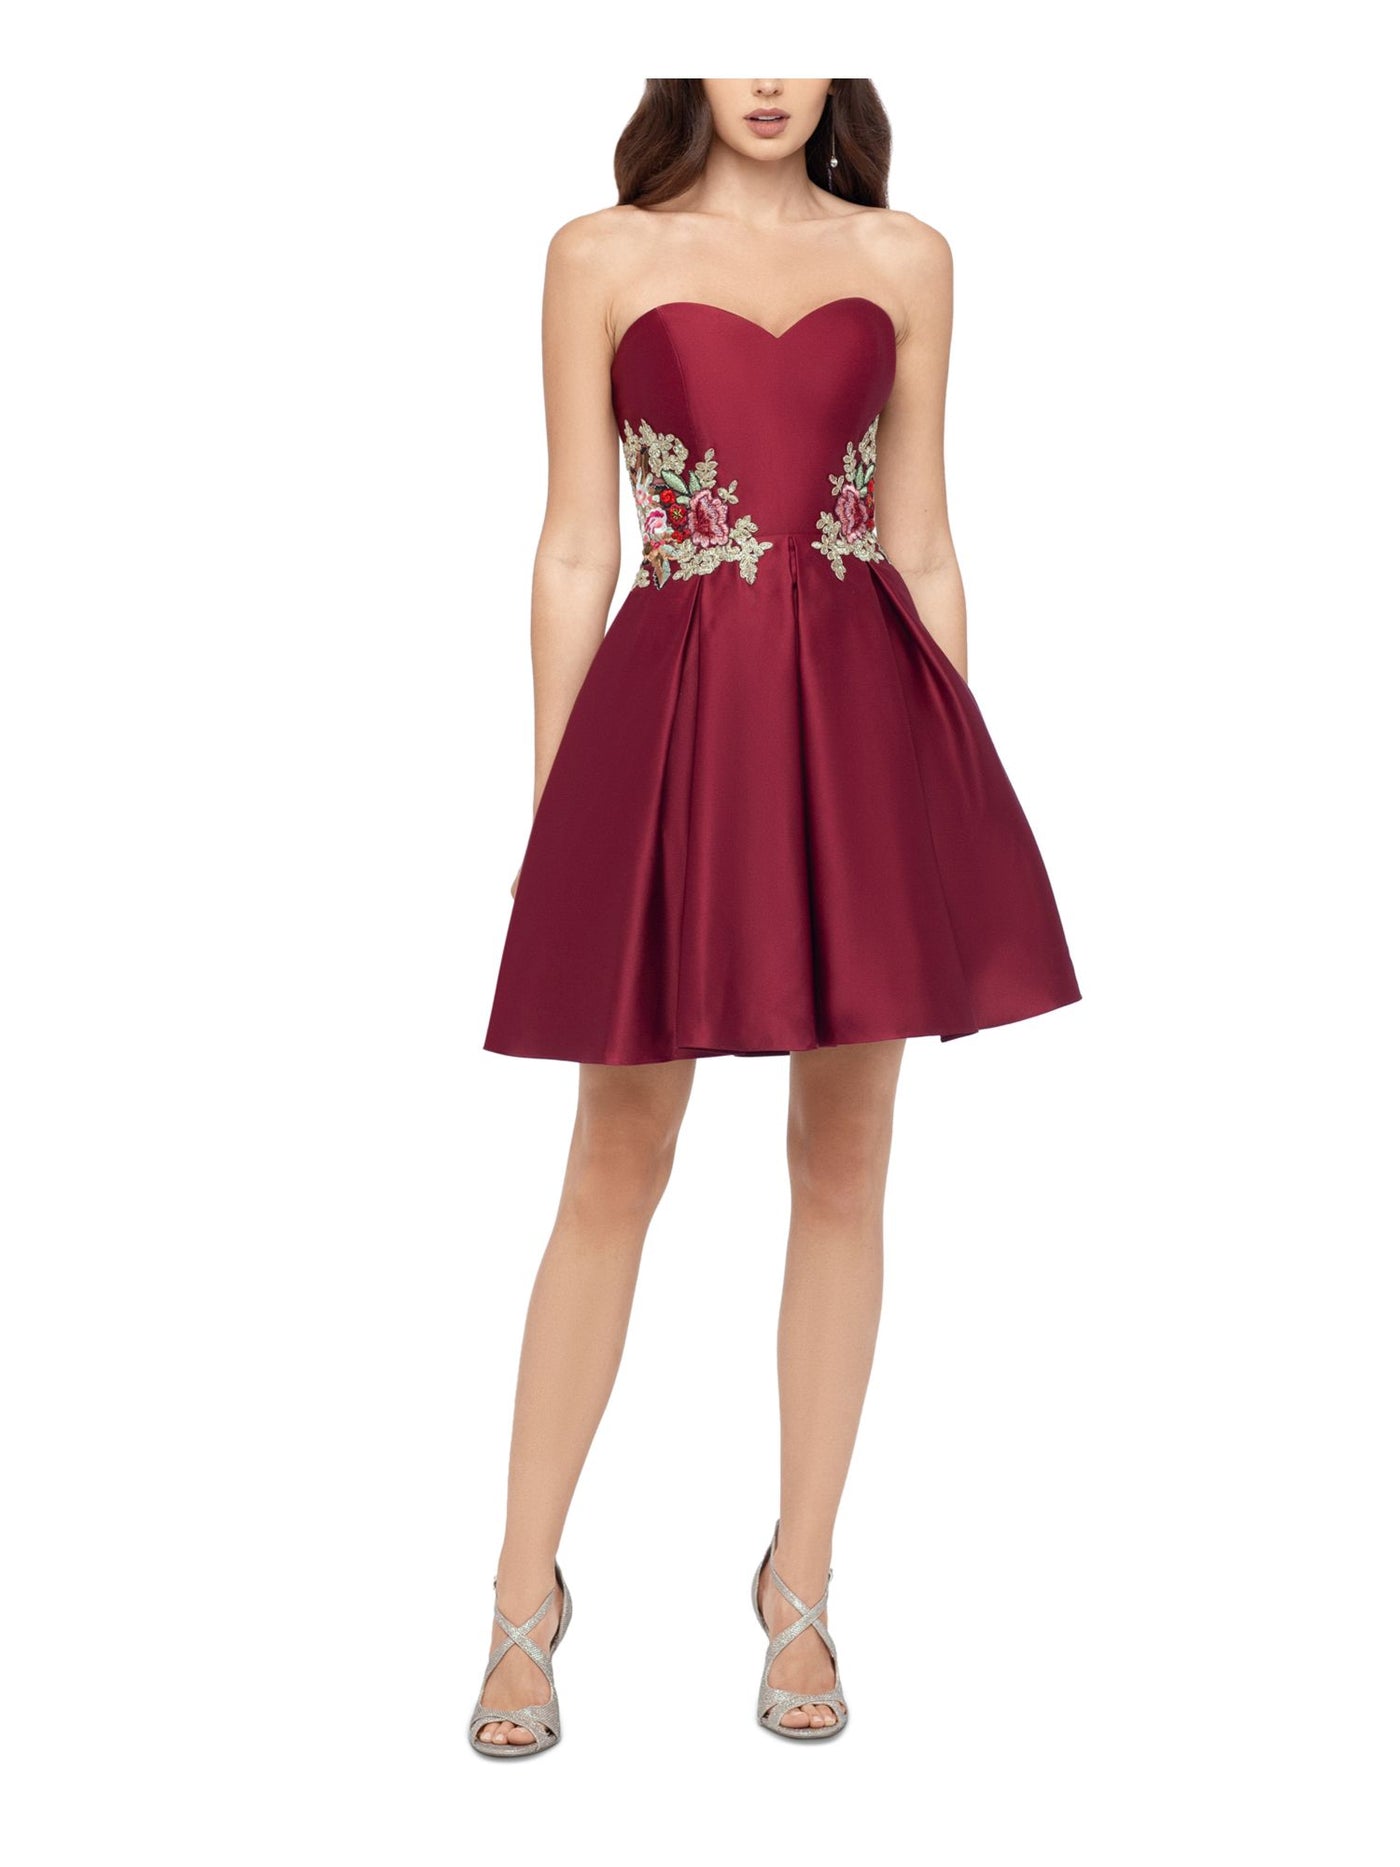 BLONDIE Womens Maroon Embellished Floral Sweetheart Neckline Above The Knee Party Fit + Flare Dress Juniors 5